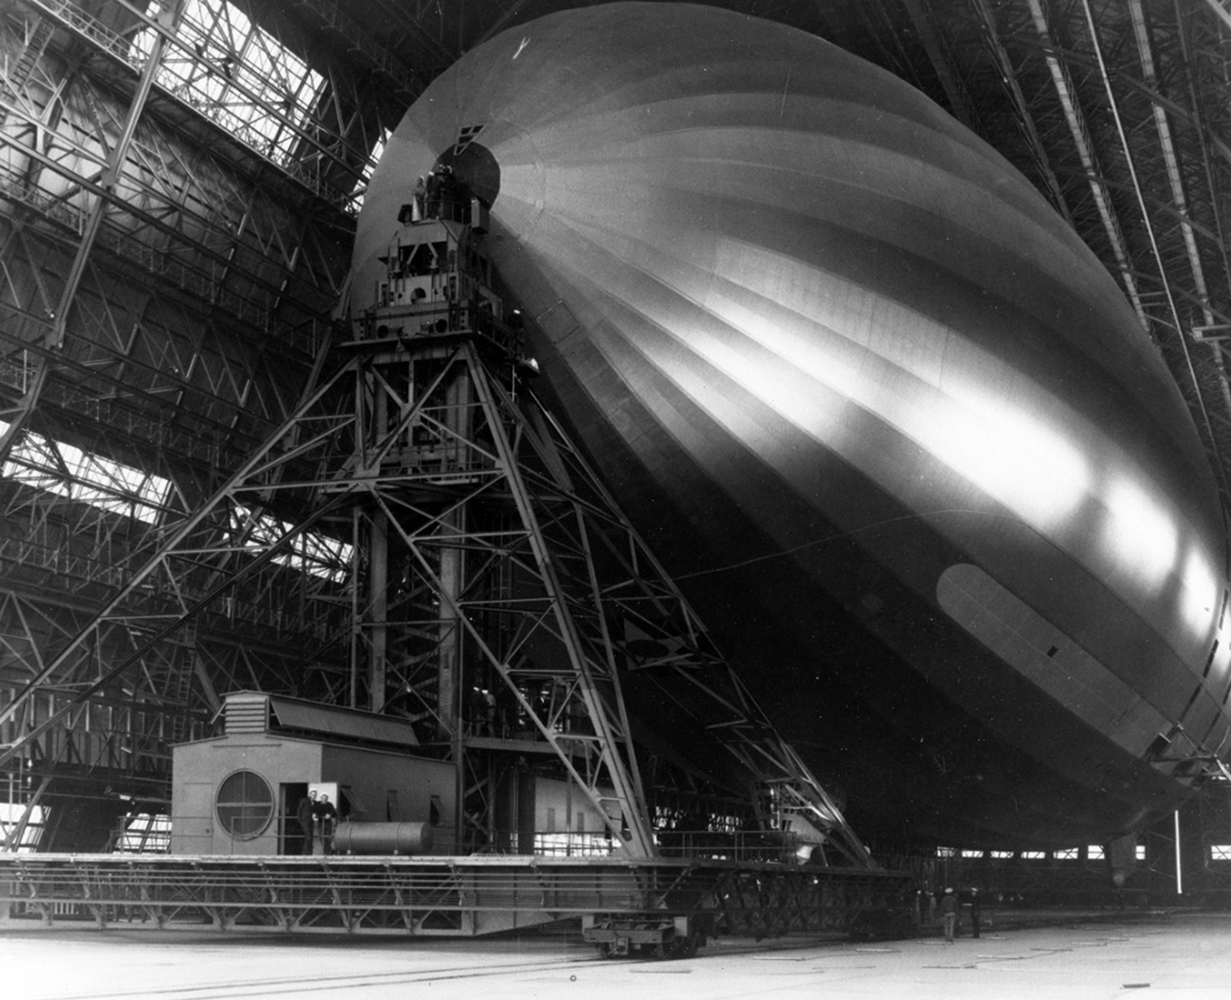 The USS Macon dirigible attached to a mooring mast inside Hangar 1. Light through the hangar windows reflects off of the silvery surface of the Macon.